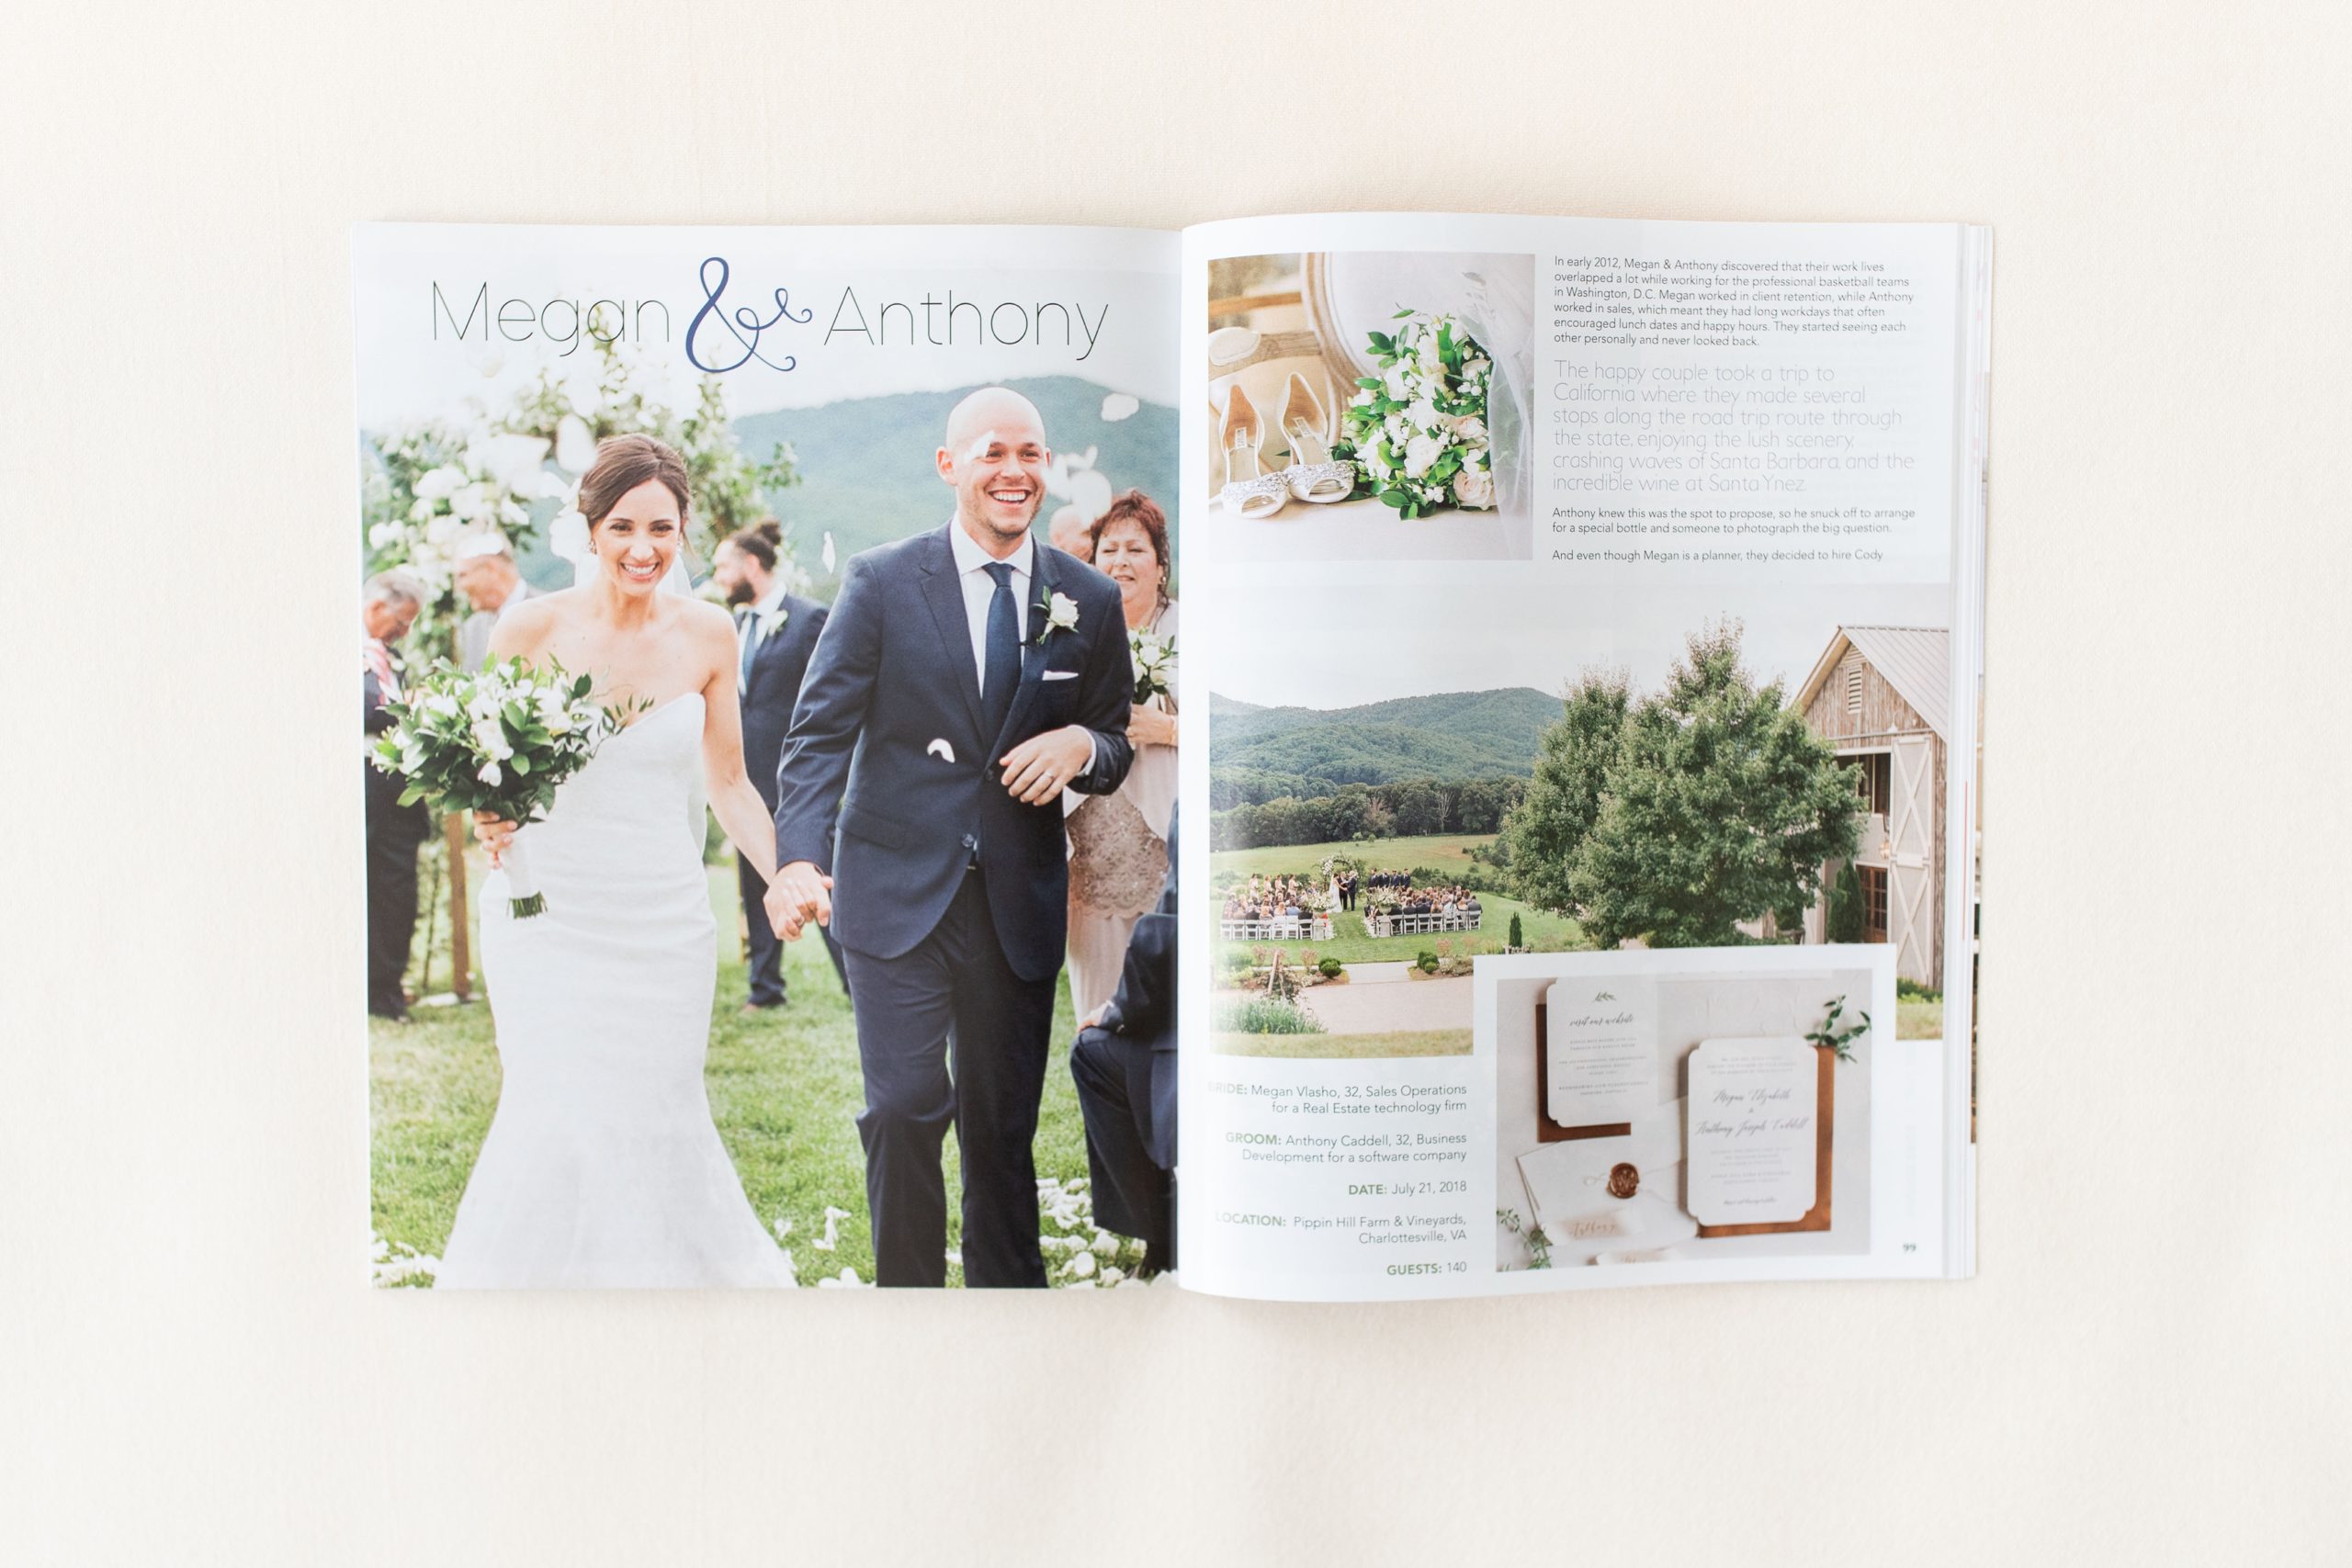 This elegant wedding at Pippin Hill in Charlottesville, Virginia is featured in the fall issue of VA Bride Magazine.